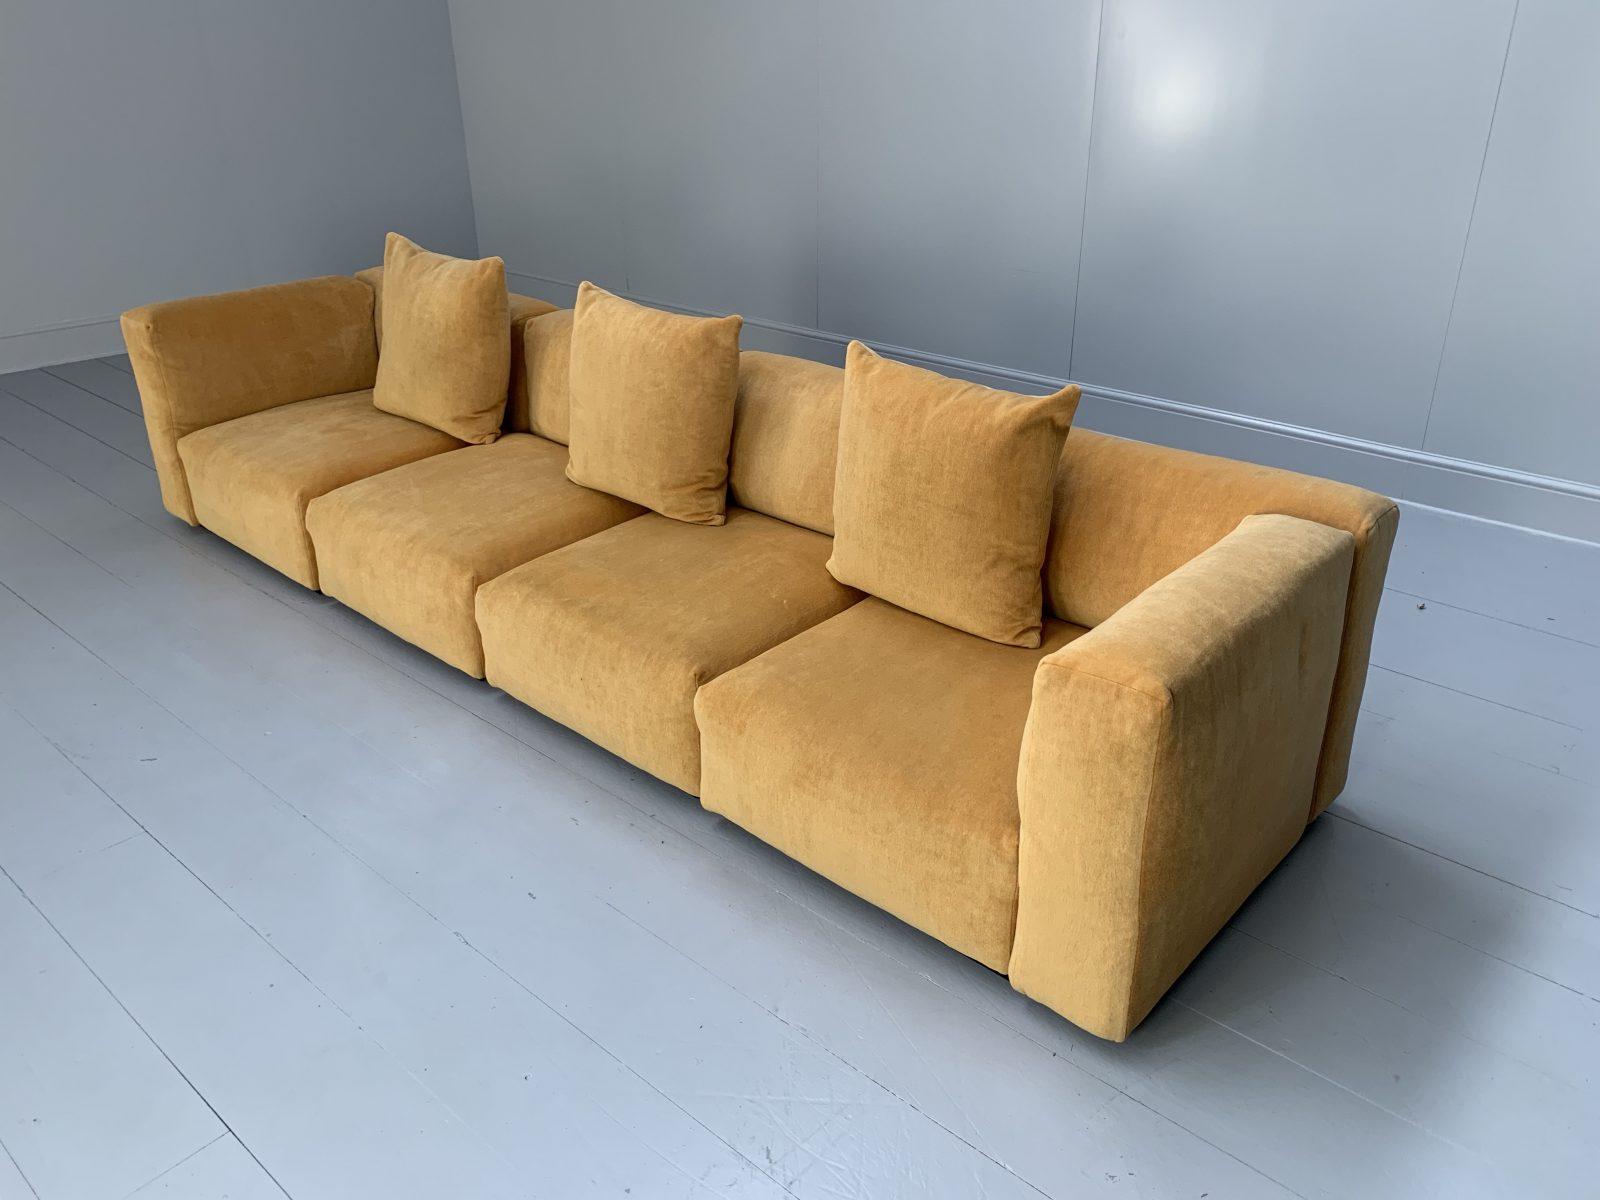 This is an iconic “271 Mex Cube” 4-piece, 4-6 seat sectional-sofa from the world renown Italian furniture house of Cassina.
 
In a world of temporary pleasures, Cassina create beautiful furniture that remains a joy forever. 
 
Dressed in the